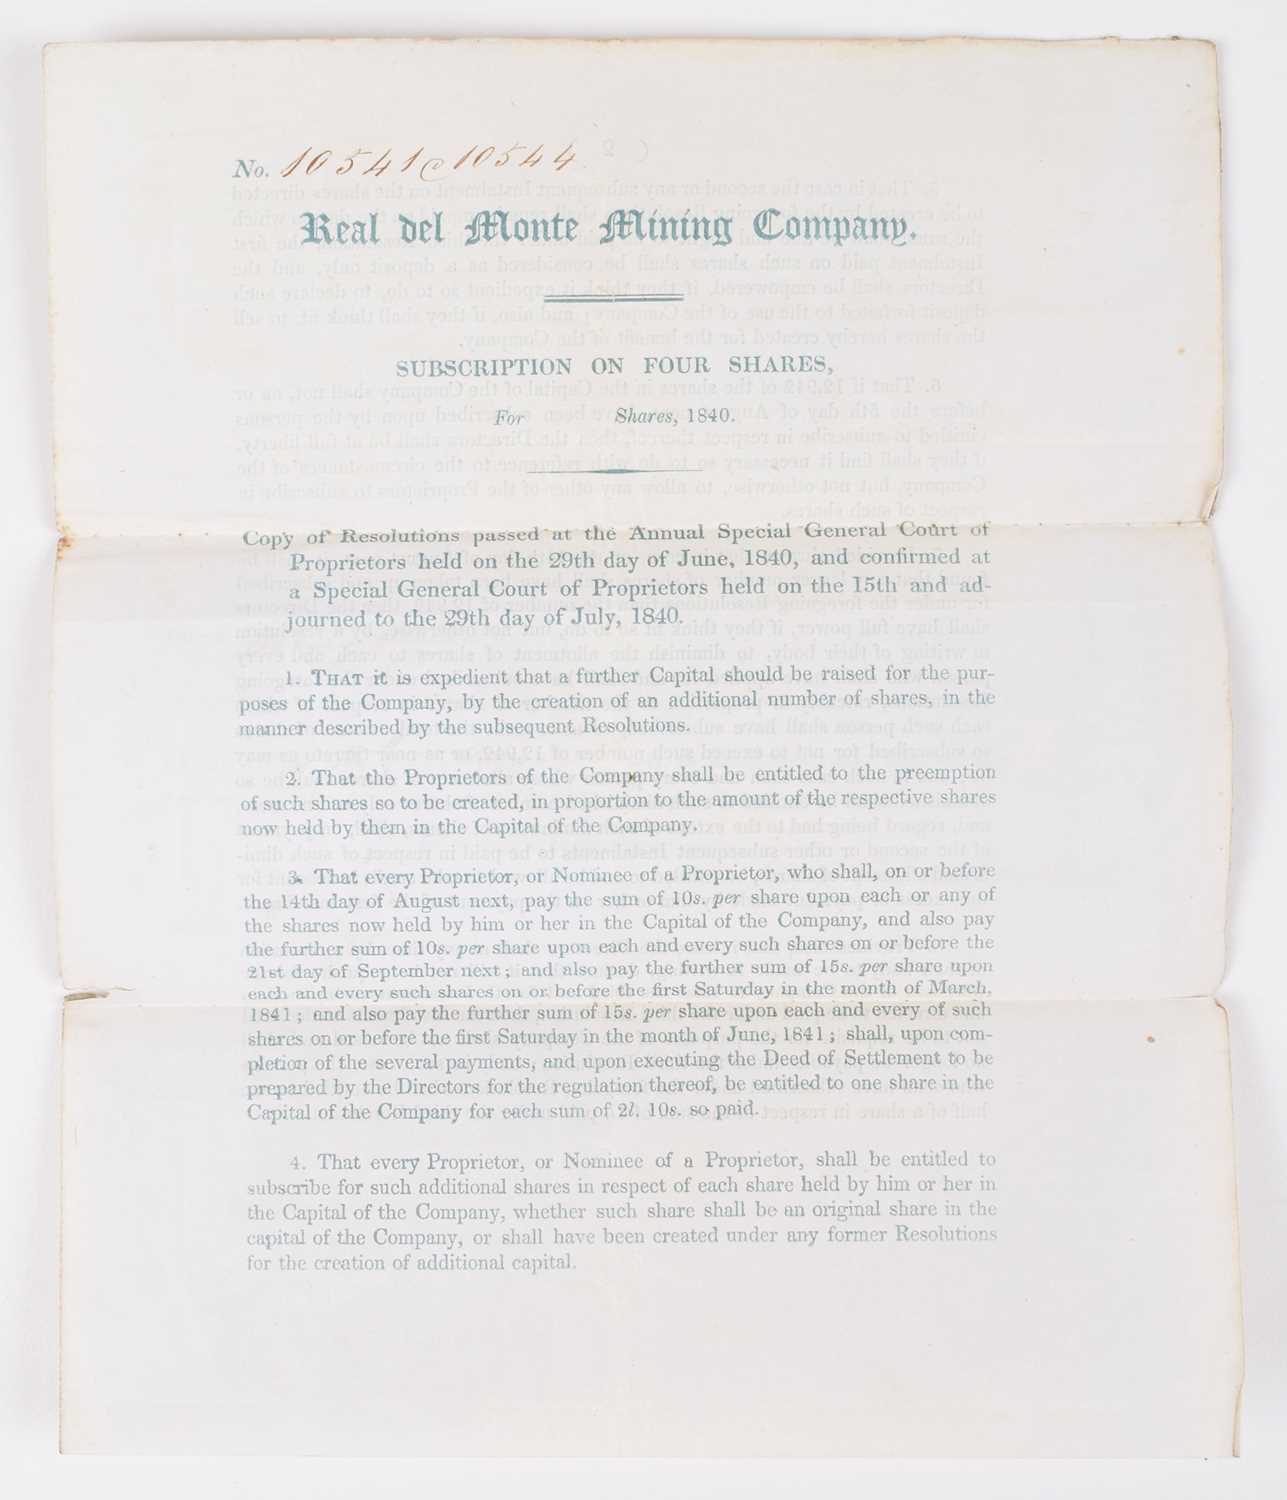 Real Del Monte Mining Company, Subscription on Four Shares, 1840. - Image 2 of 4